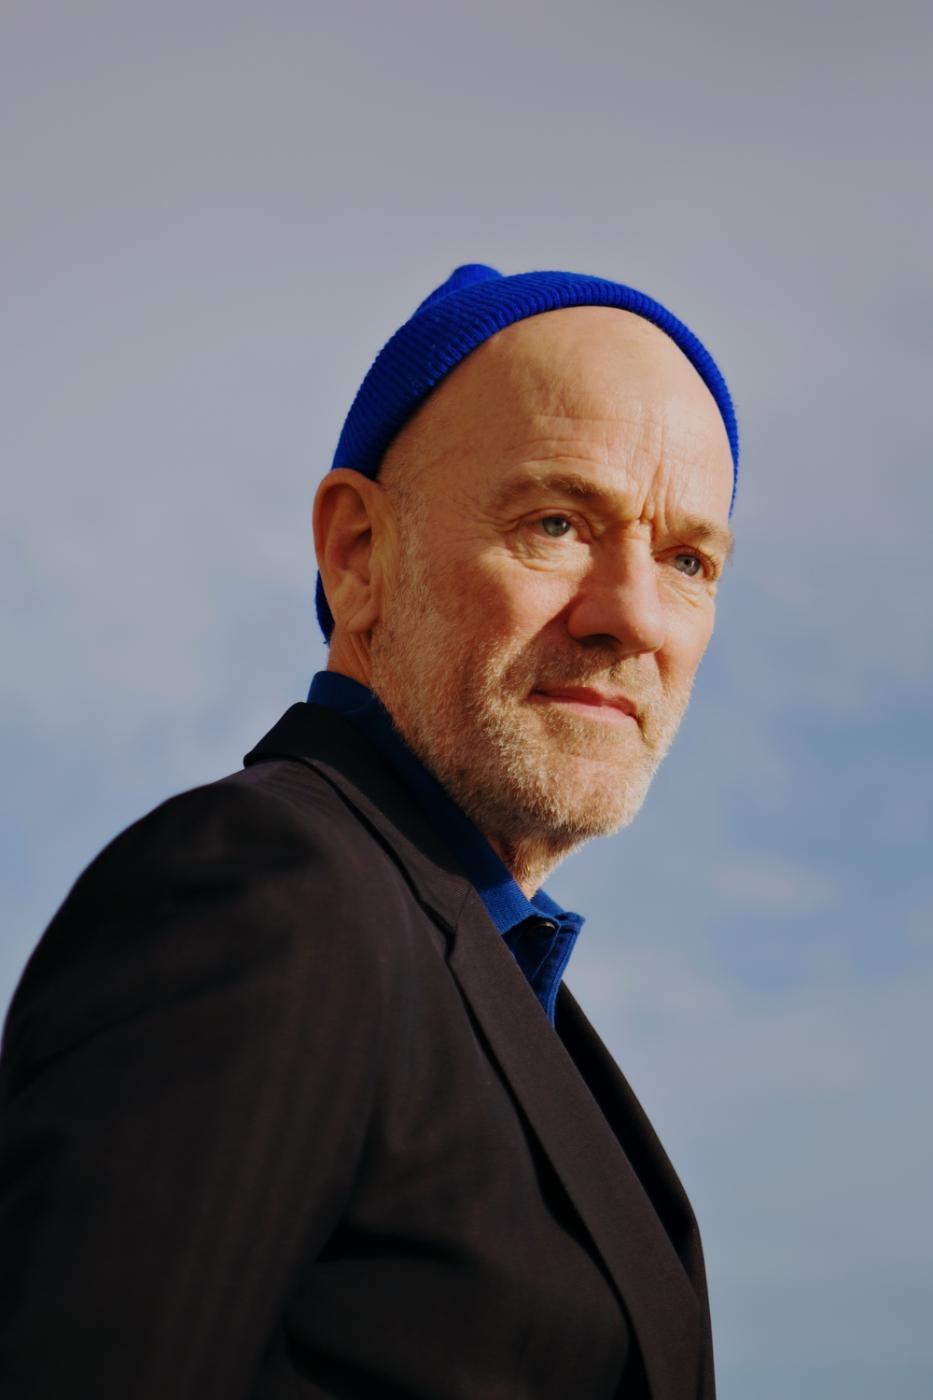 Artists - Michael Stipe for the New Yorker